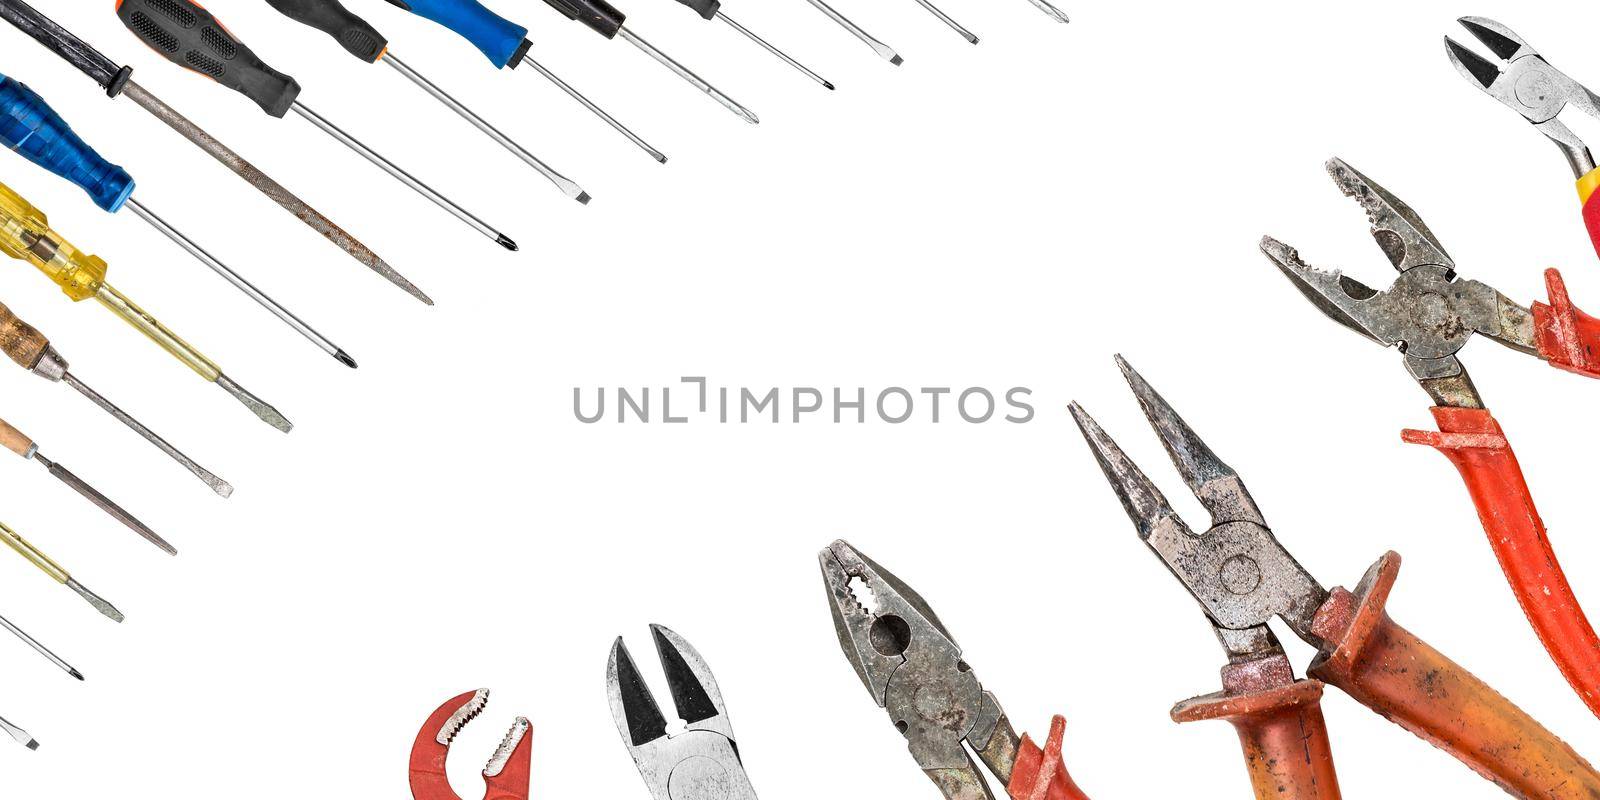 Collage of different work tools instruments for renovation isolated on white background with copy space